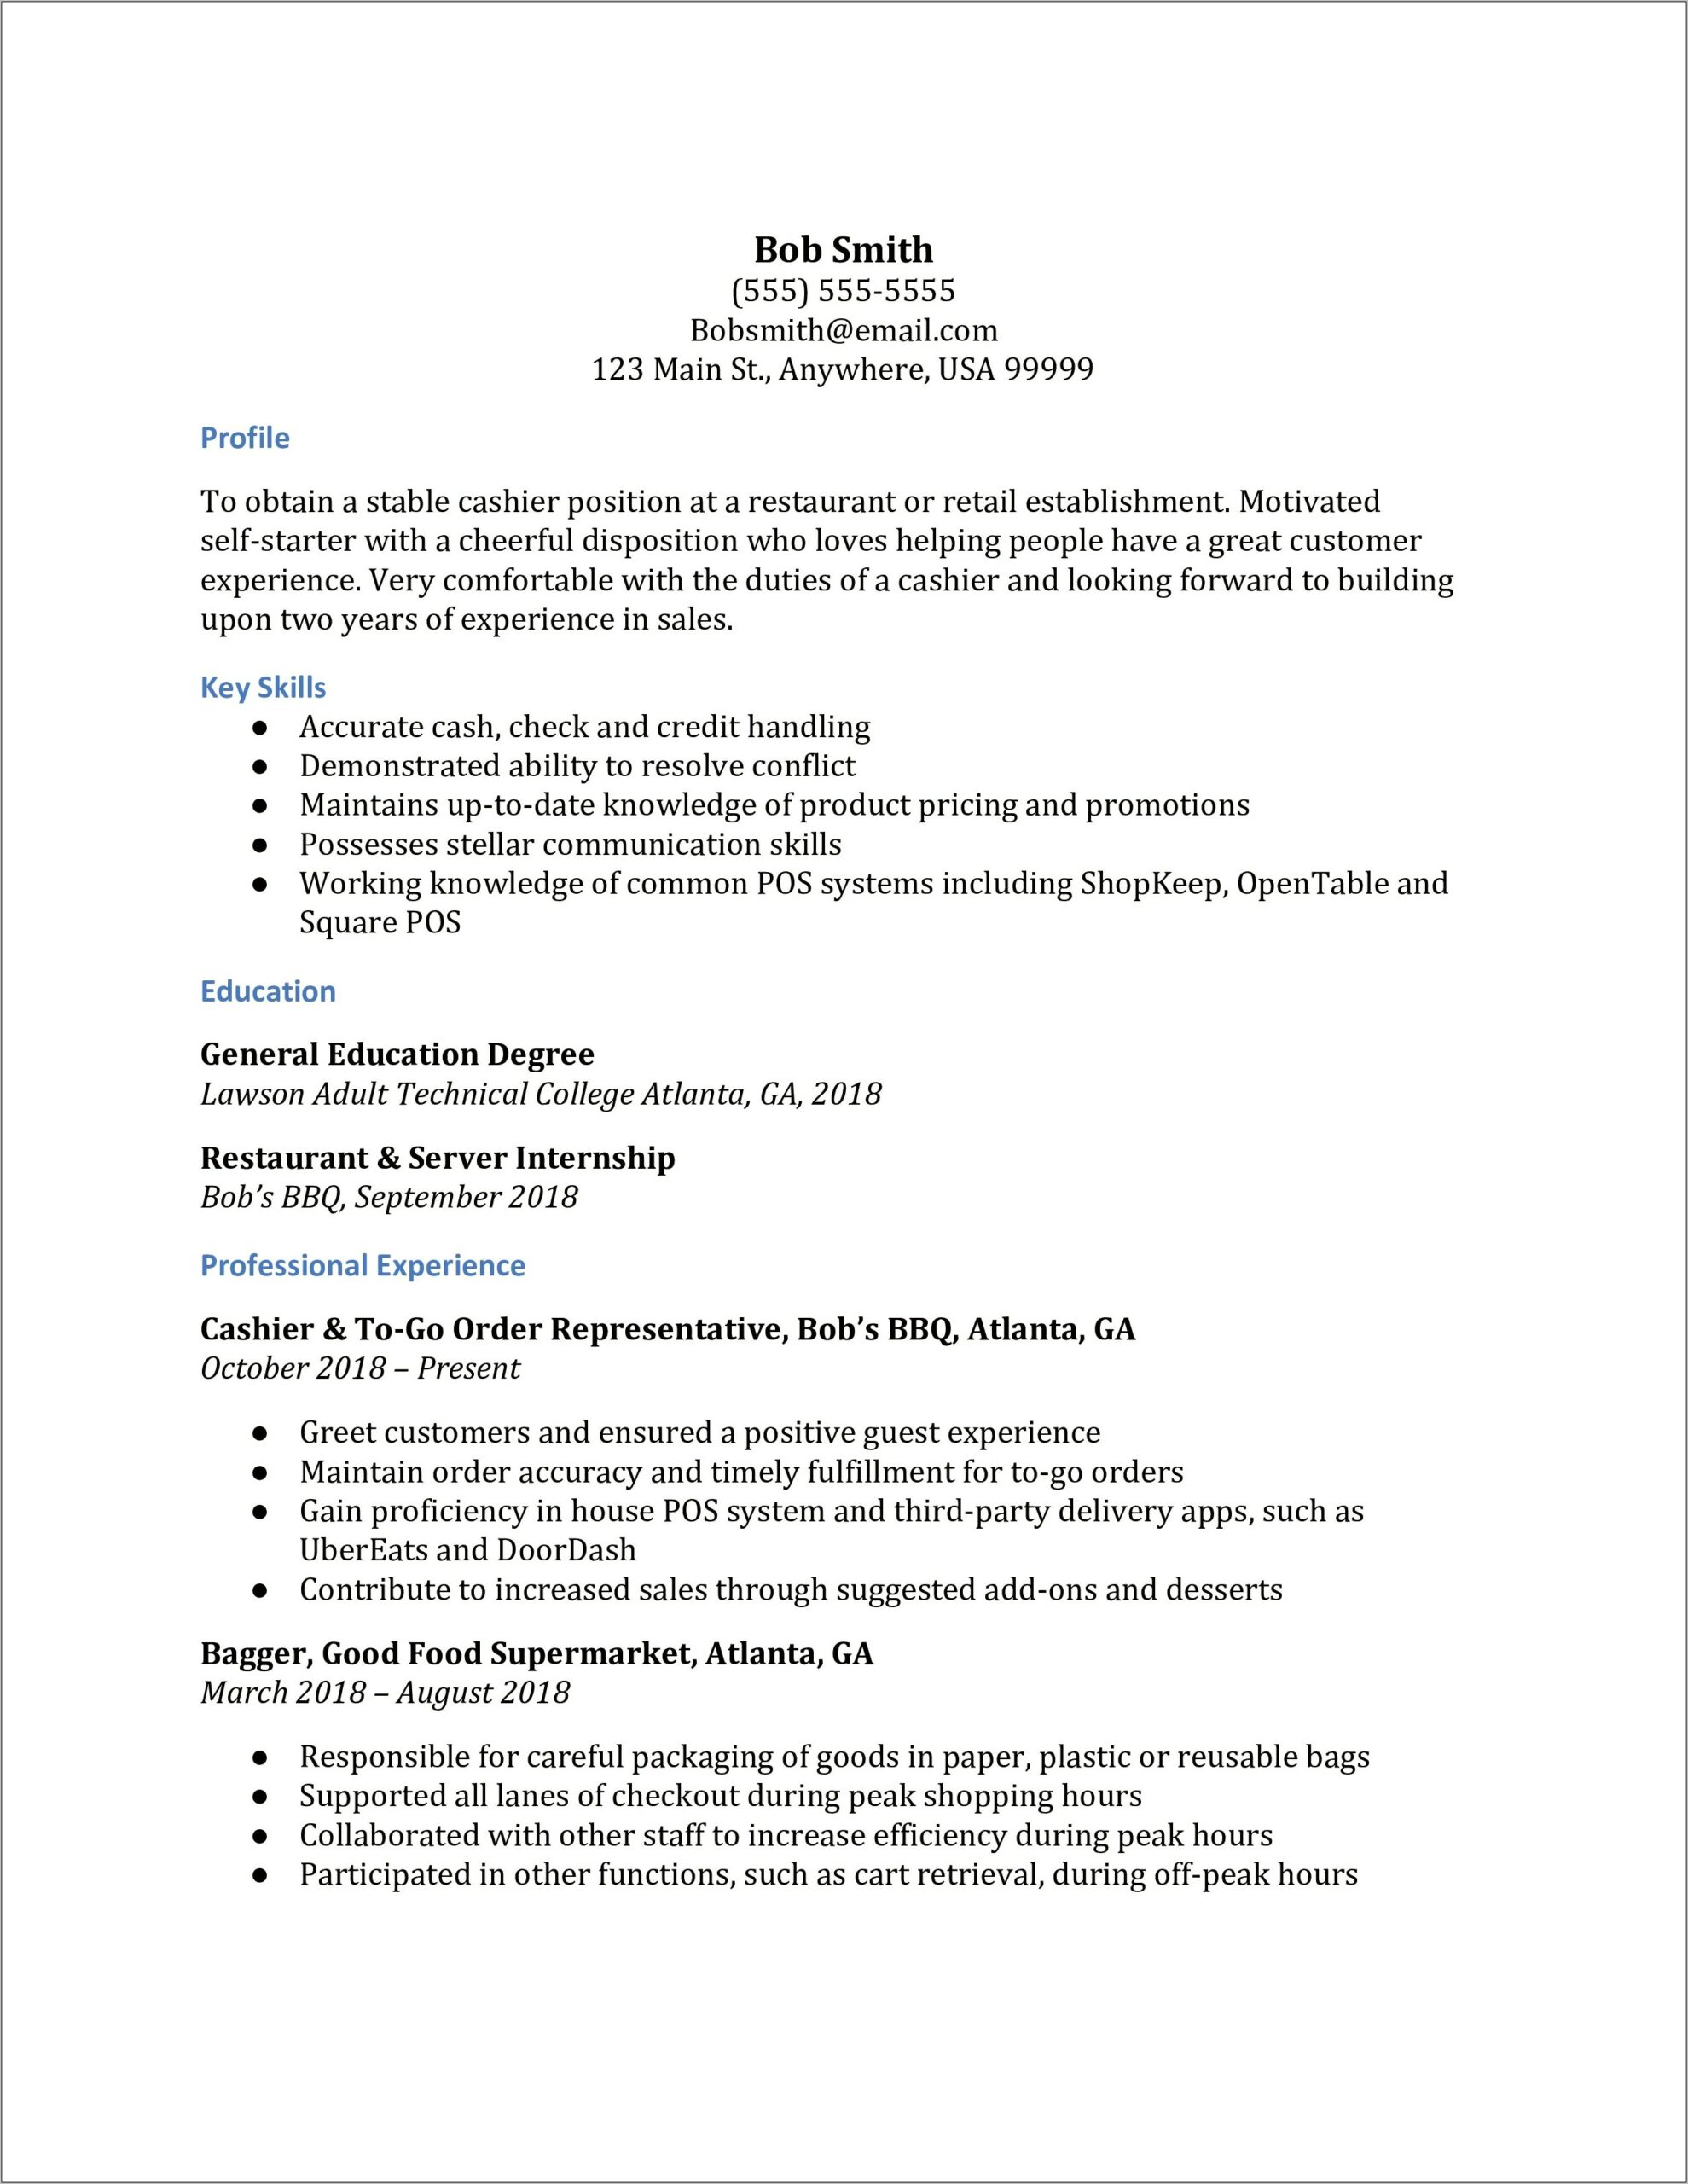 Resume Sample For Cashier In Fast Food